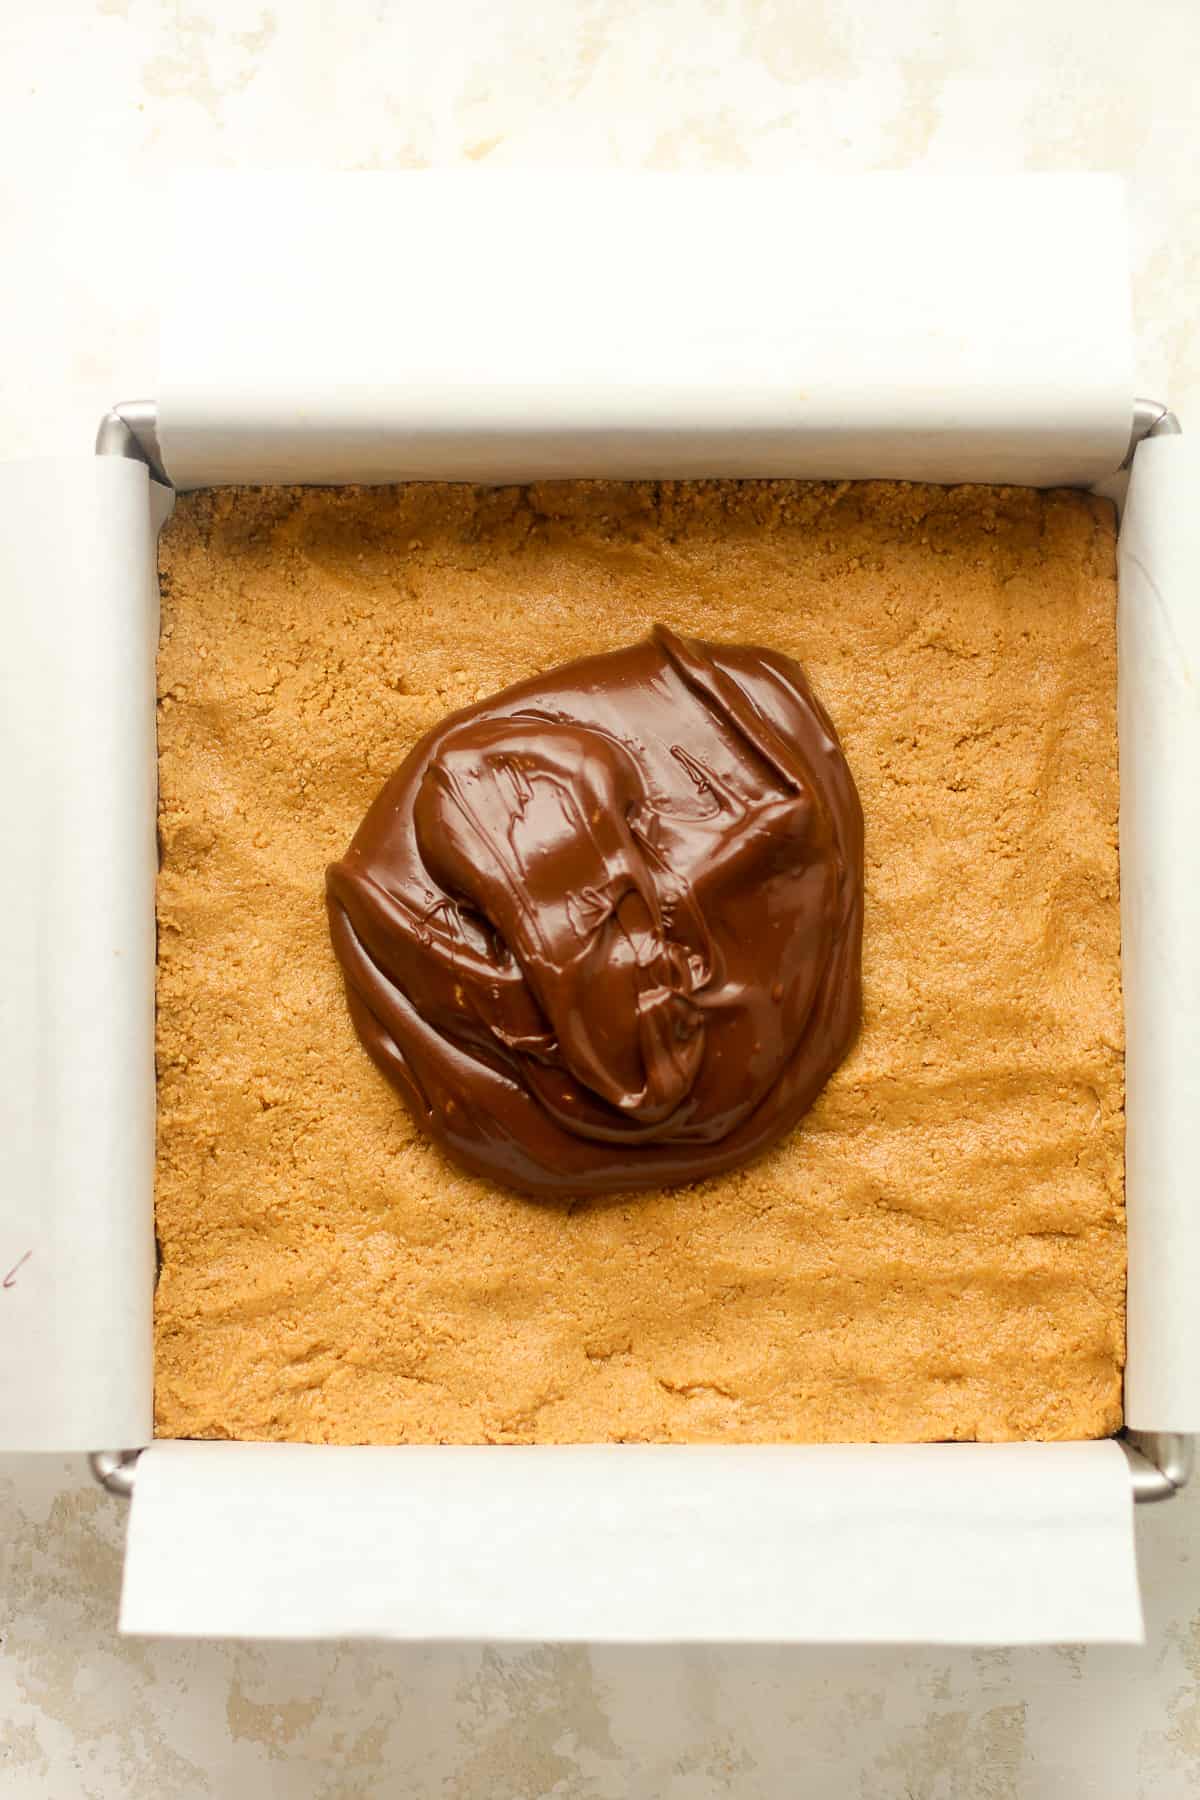 A square of peanut butter mixture plus some creamy chocolate on top before spreading.